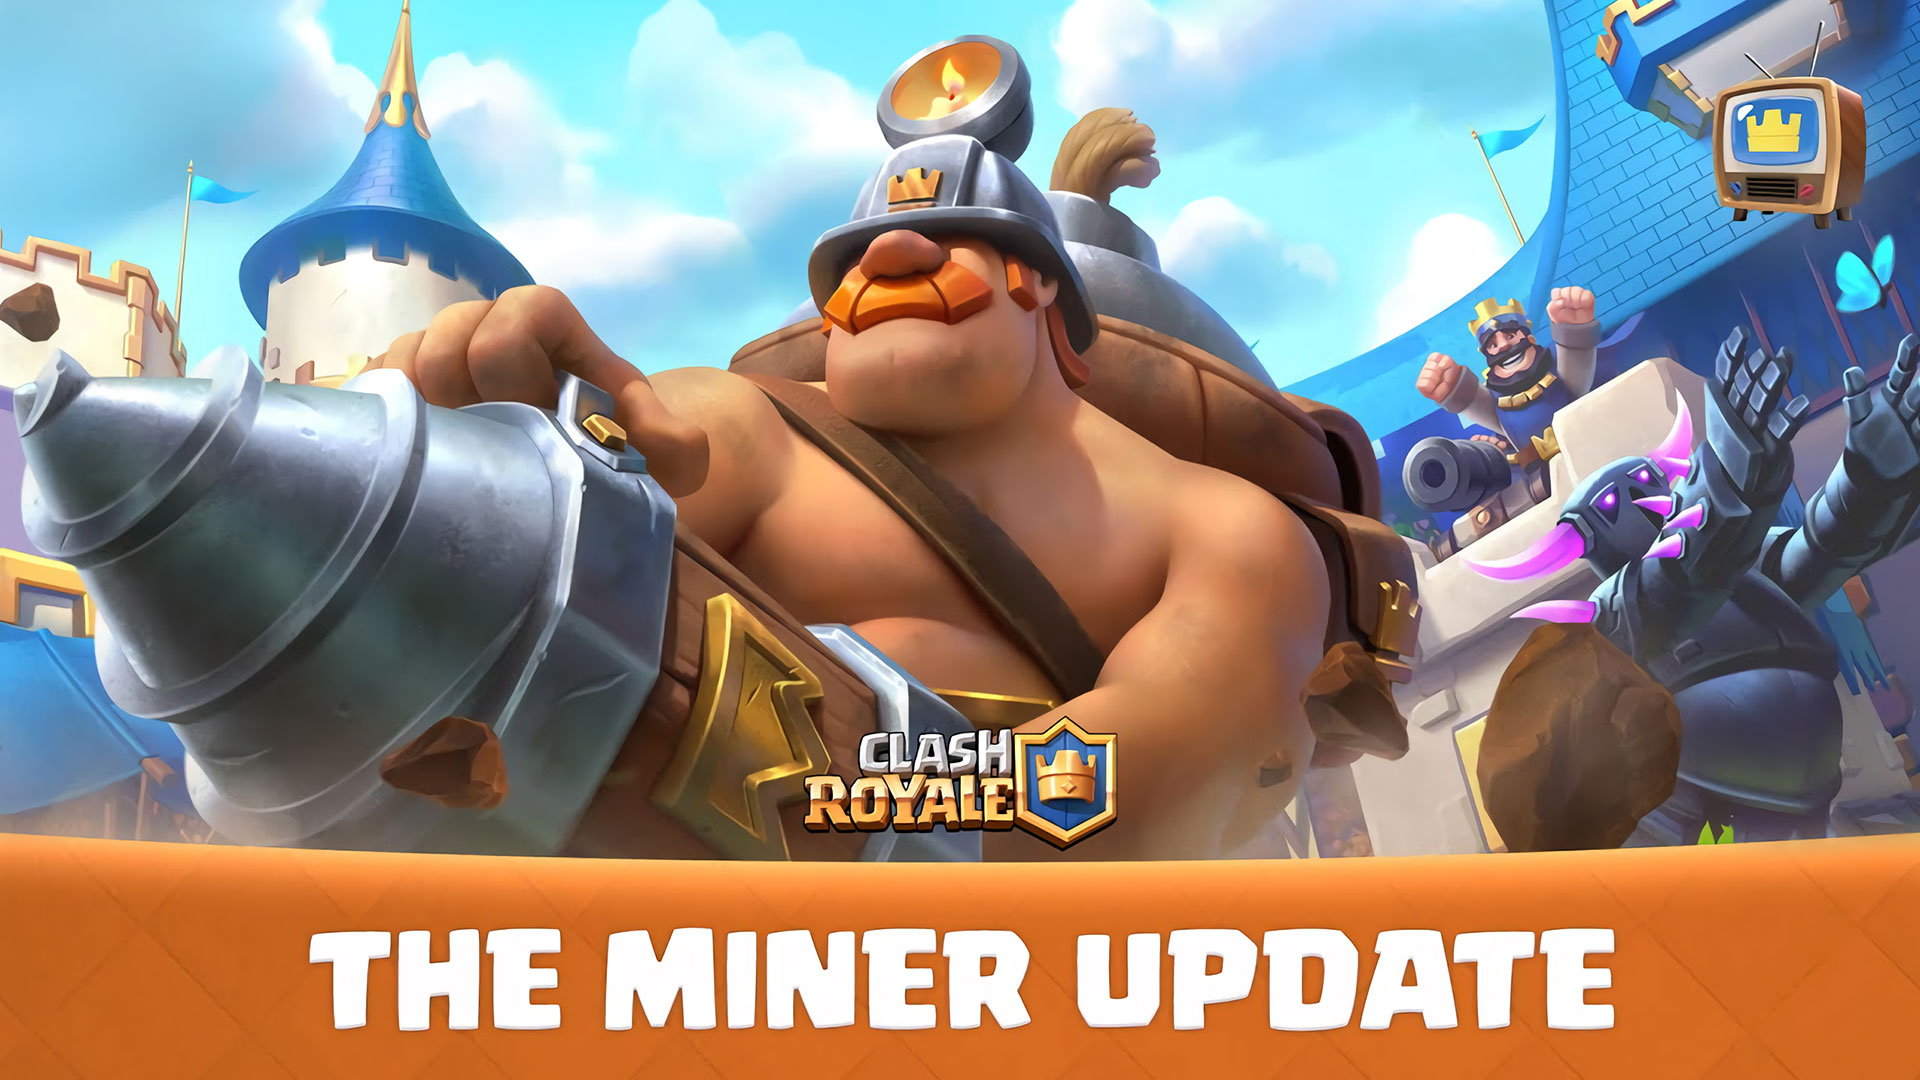 Clash Royale April 2022 Miner Update, balance changes and more PC